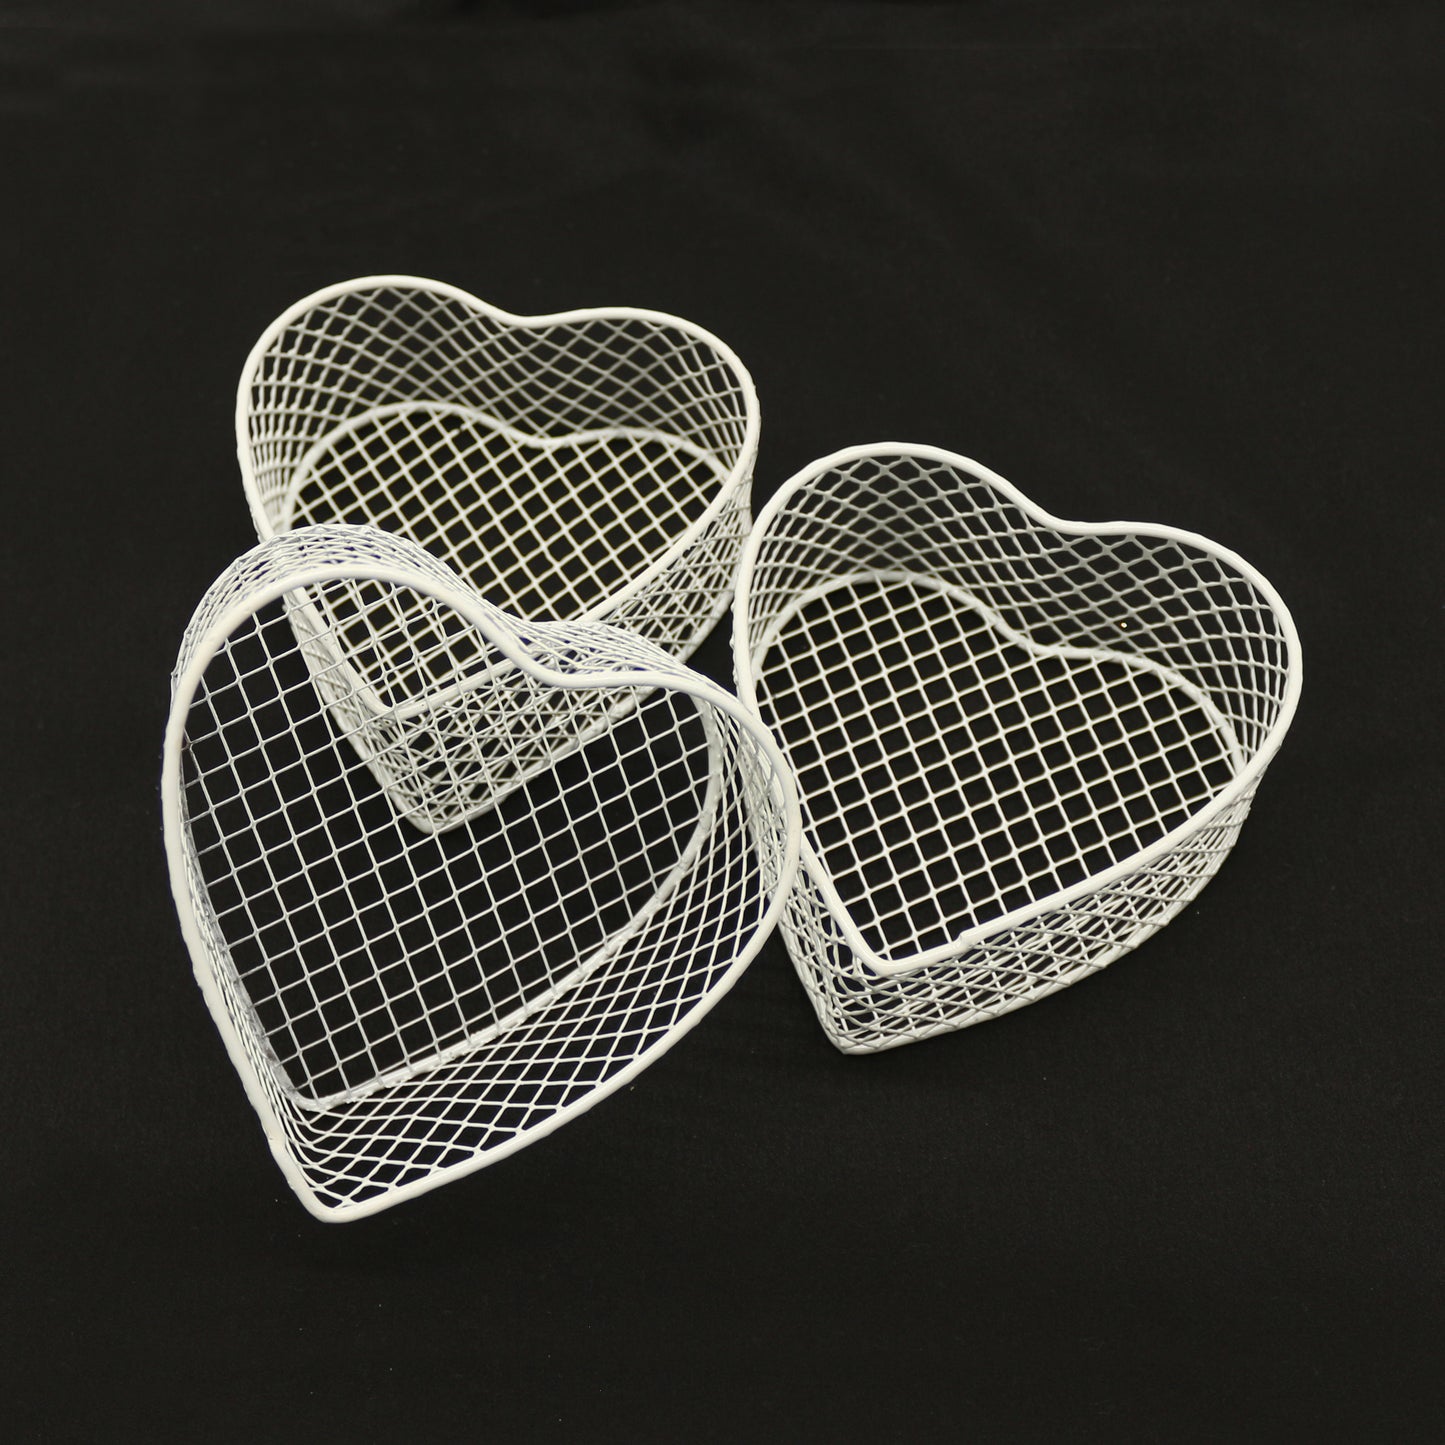 CVHOMEDECO. Mini Metal Wire Storage Baskets Desks & Shelves Organizer Trinkets Container, Great for Store Spices, Gifts or Giving. Set of 3.